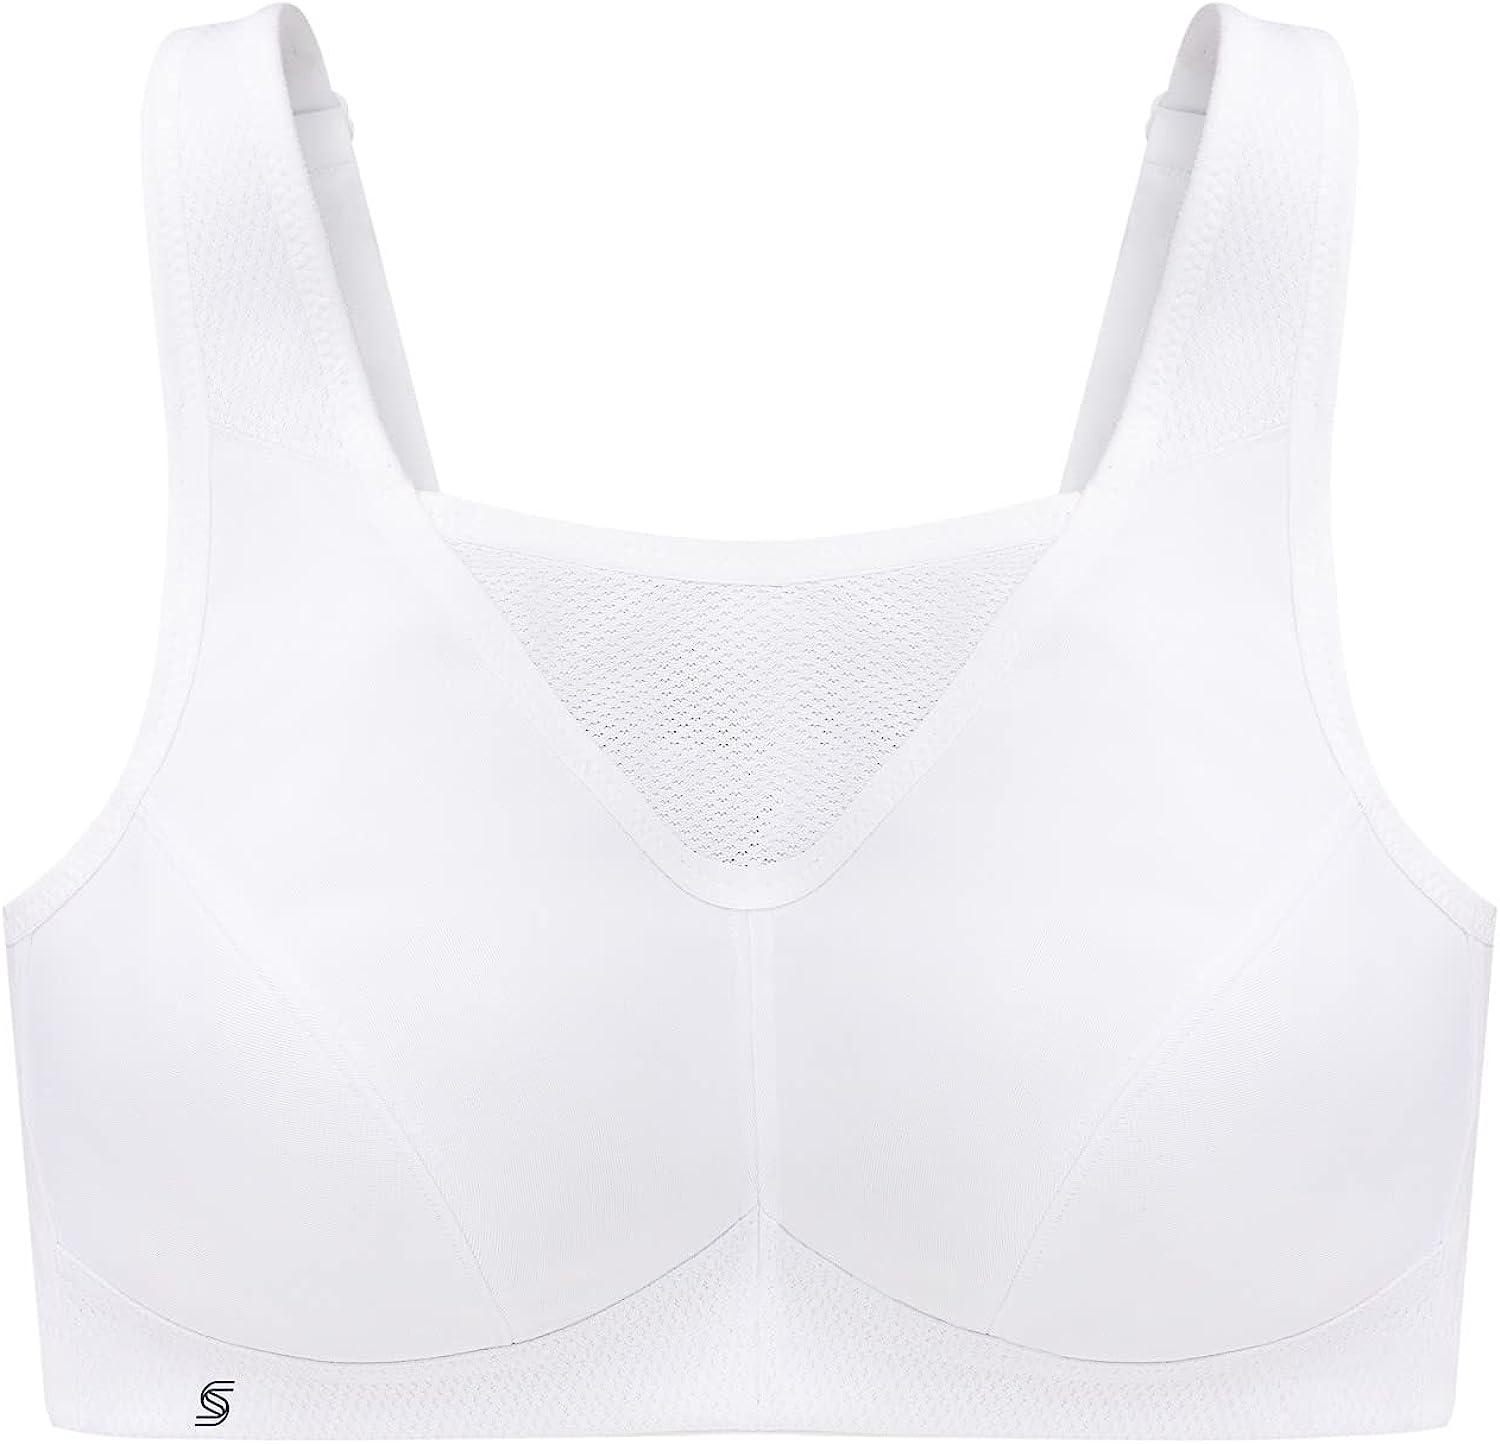 La Senza Racerback Bra 32D on tag Sister Size: 34C Wired Normal padding  With minimal issue, see pictures Front closure Php150 All items are from US  Bale, Women's Fashion, Undergarments & Loungewear